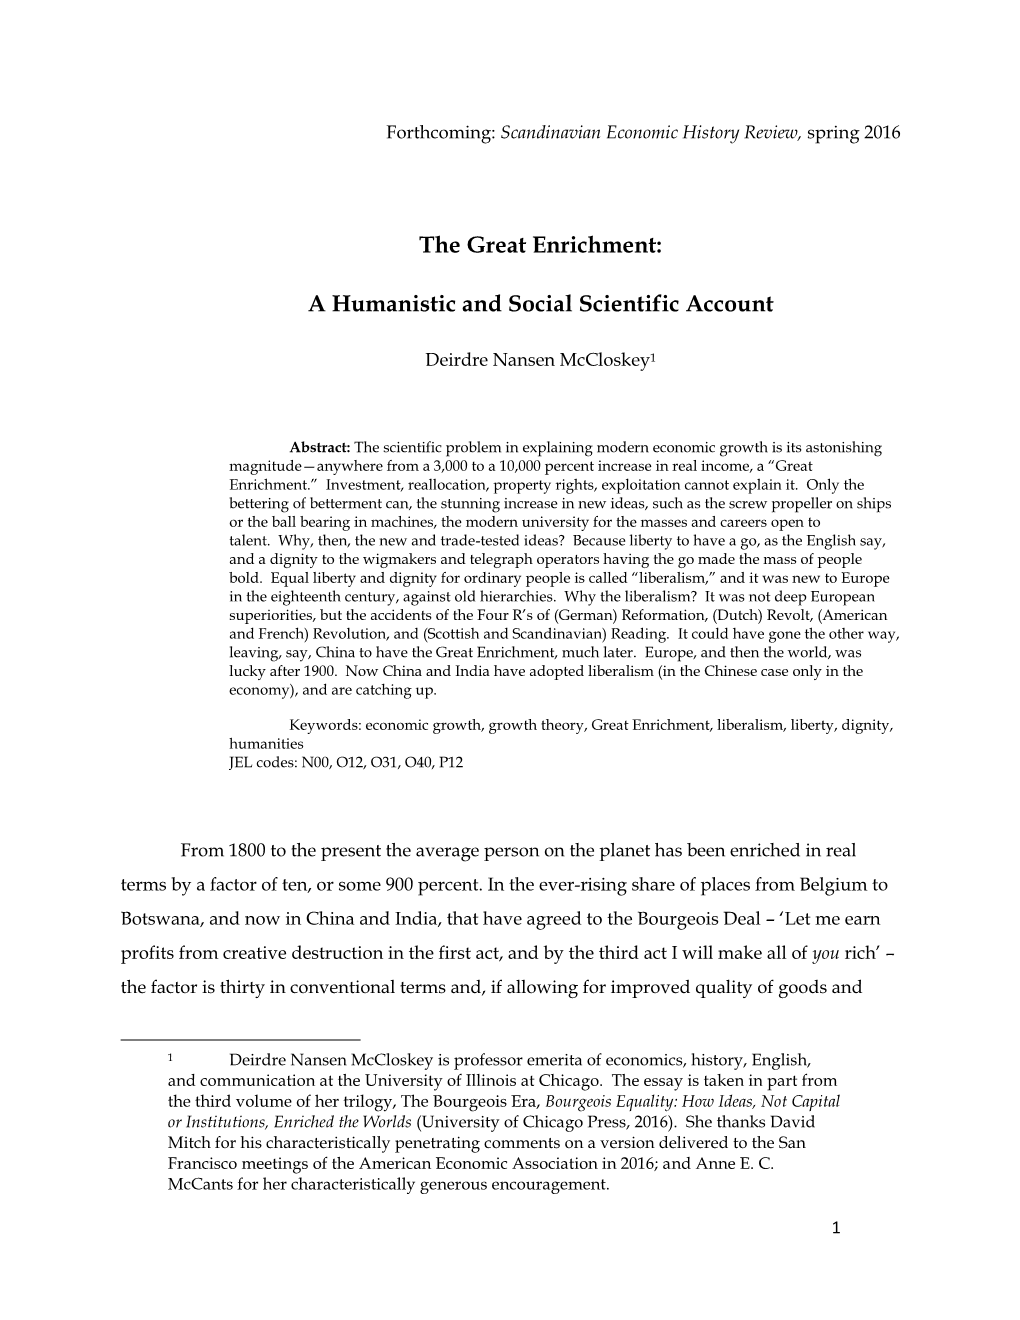 The Great Enrichment: a Humanistic and Social Scientific Account